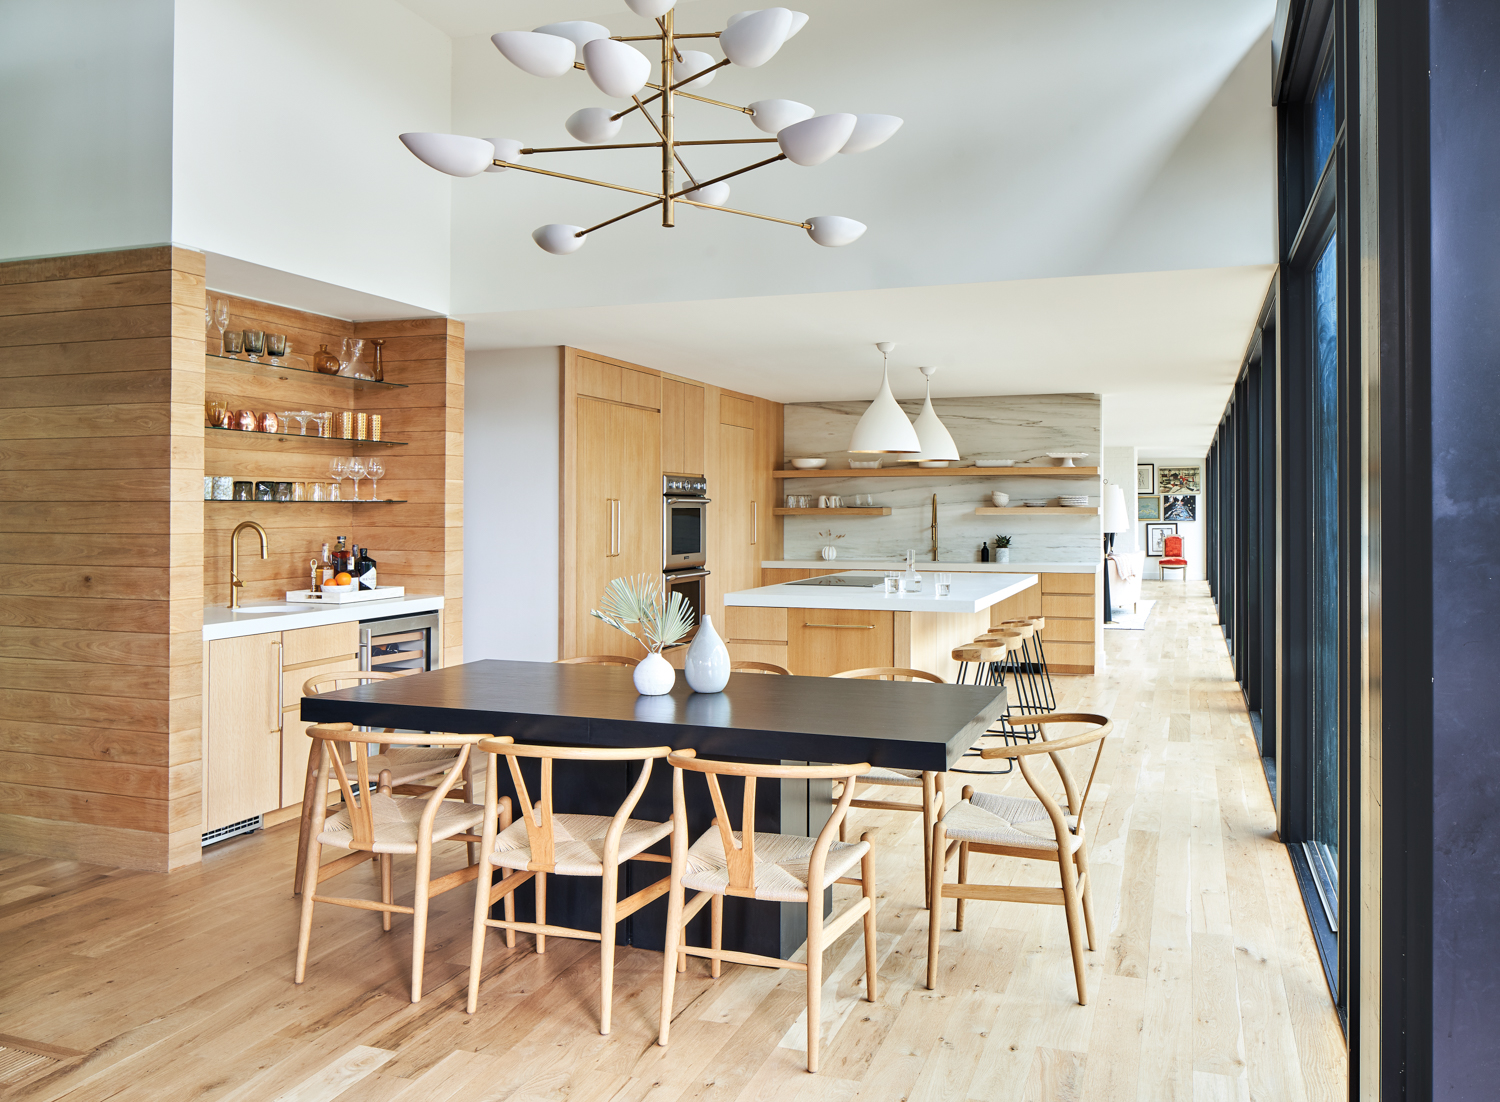 Open-format kitchen with modern dining area and pale wood cabinetry